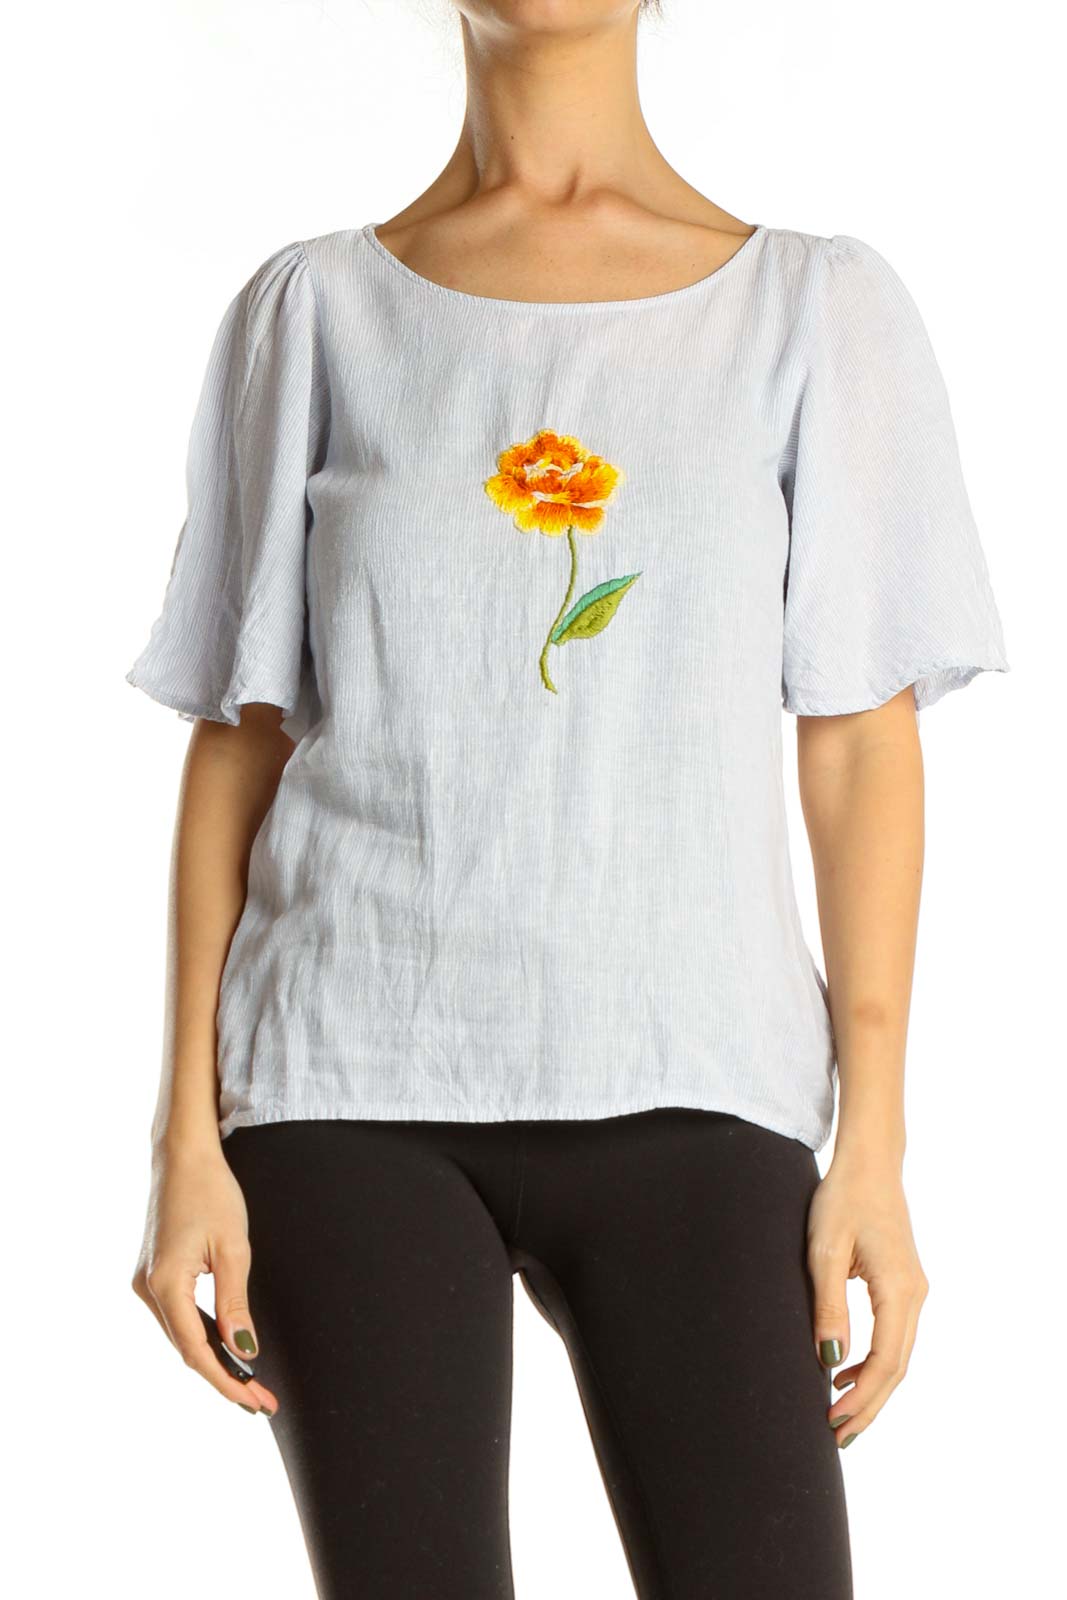 Reworked: Gray Hand Embroidered Shirt with Orange Flower Front